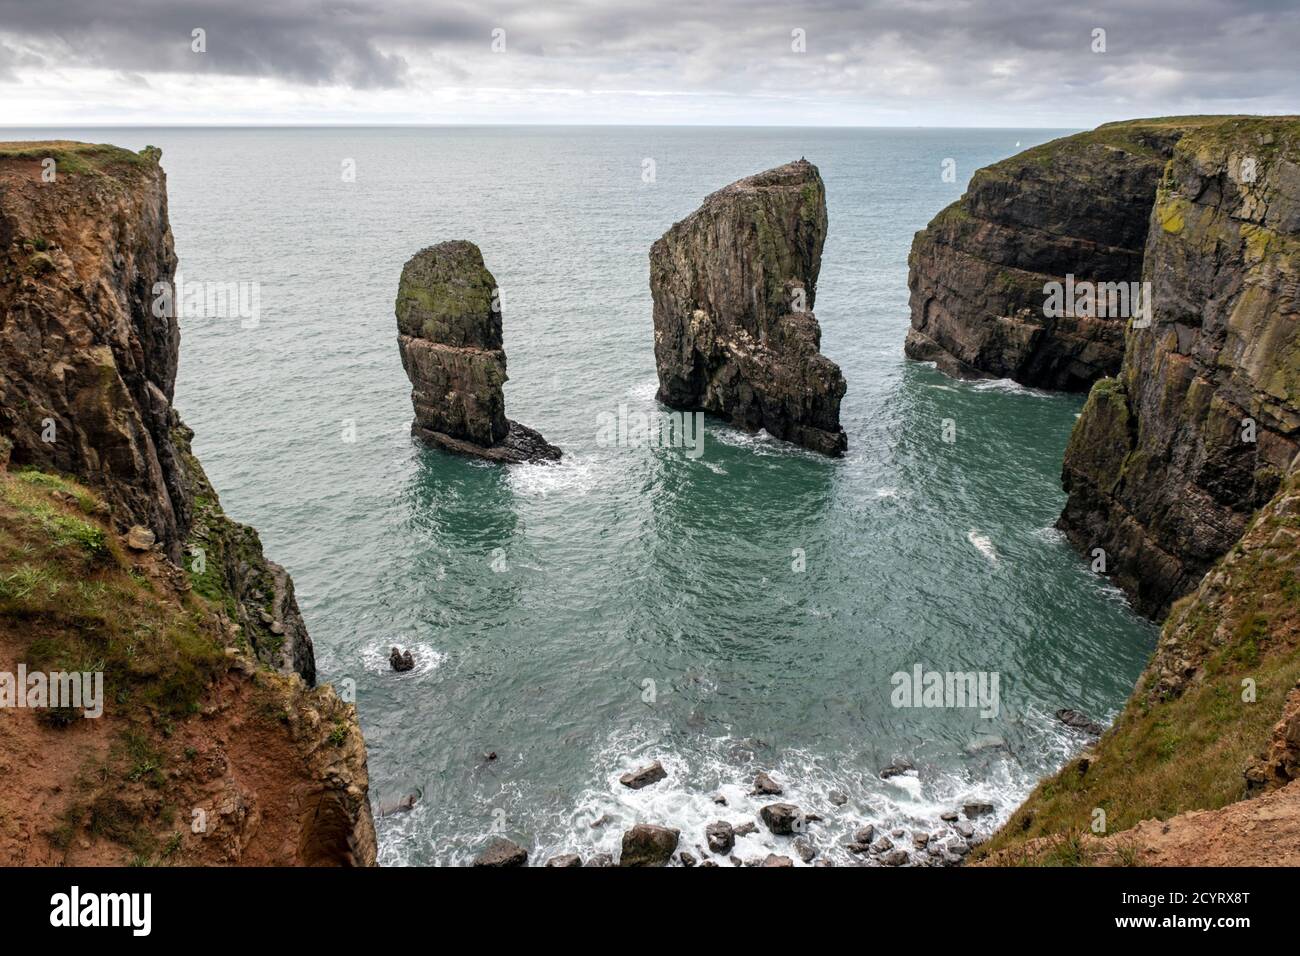 Elegug Stacks are dramatic pinnacles of limestone and home to colonies of Guillemots, Pembrokeshire Coast National Park,  Pembrokeshire, Wales. Stock Photo